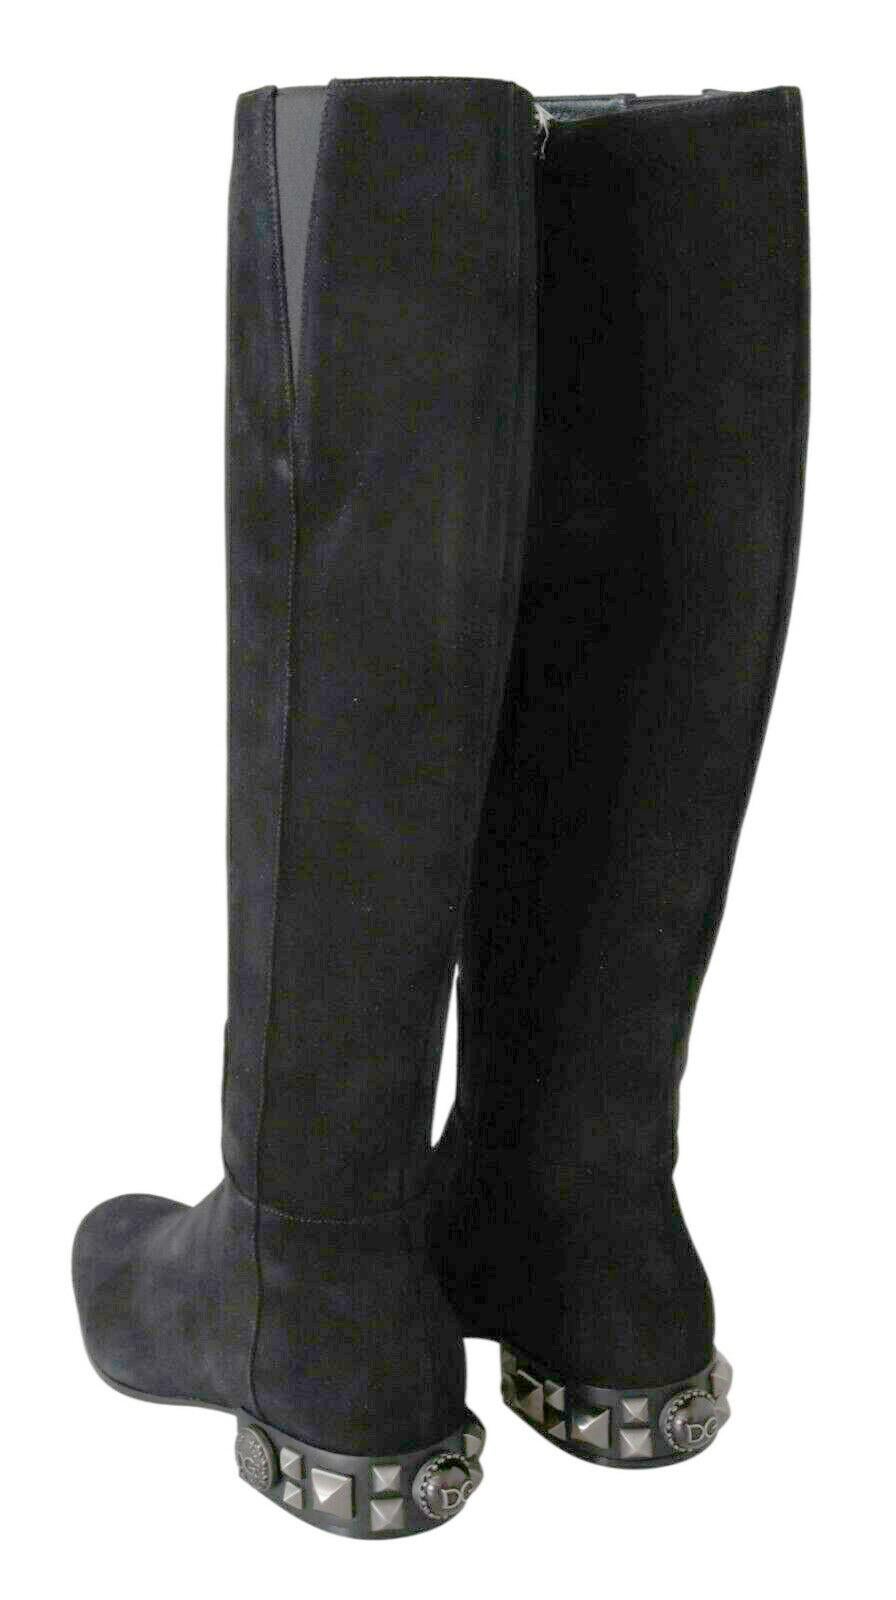 Dolce & Gabbana Black Suede Leather Flat Knee High Boots With Zipper DG Logo For Sale 3